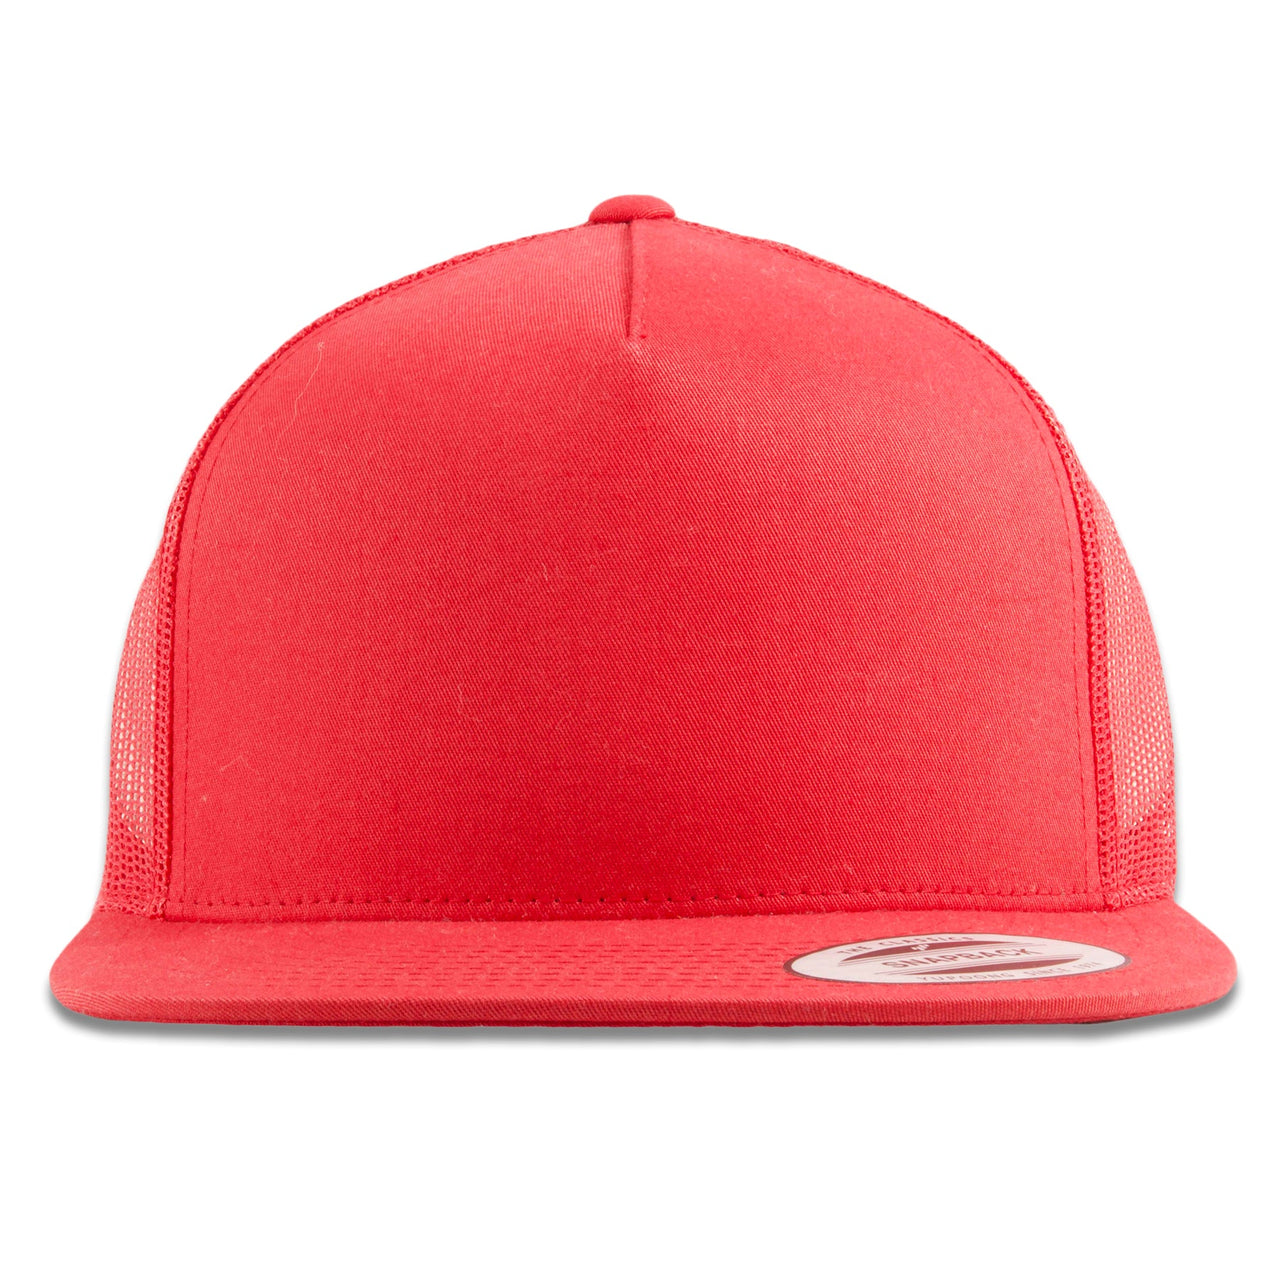 The red mesh-back trucker snapback features a red high structured crown and a red flat brim